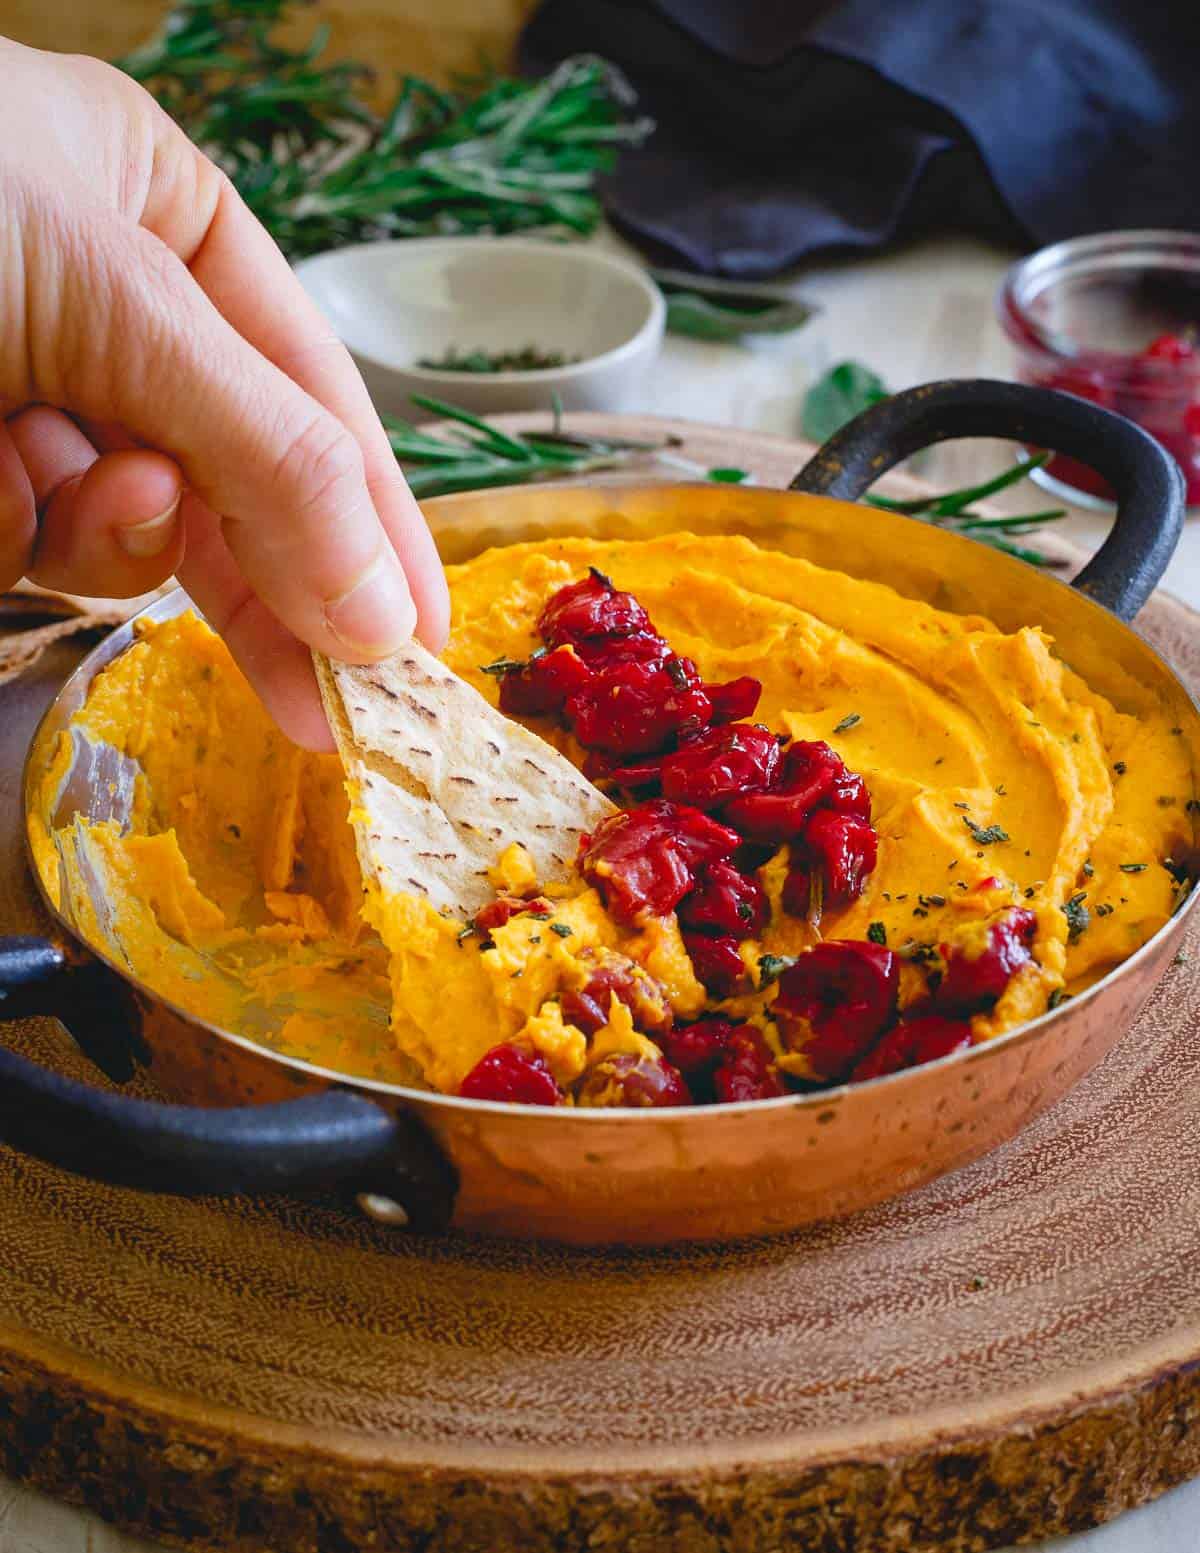 Tart cherries and herbs complement this creamy goat cheese butternut squash dip perfectly.